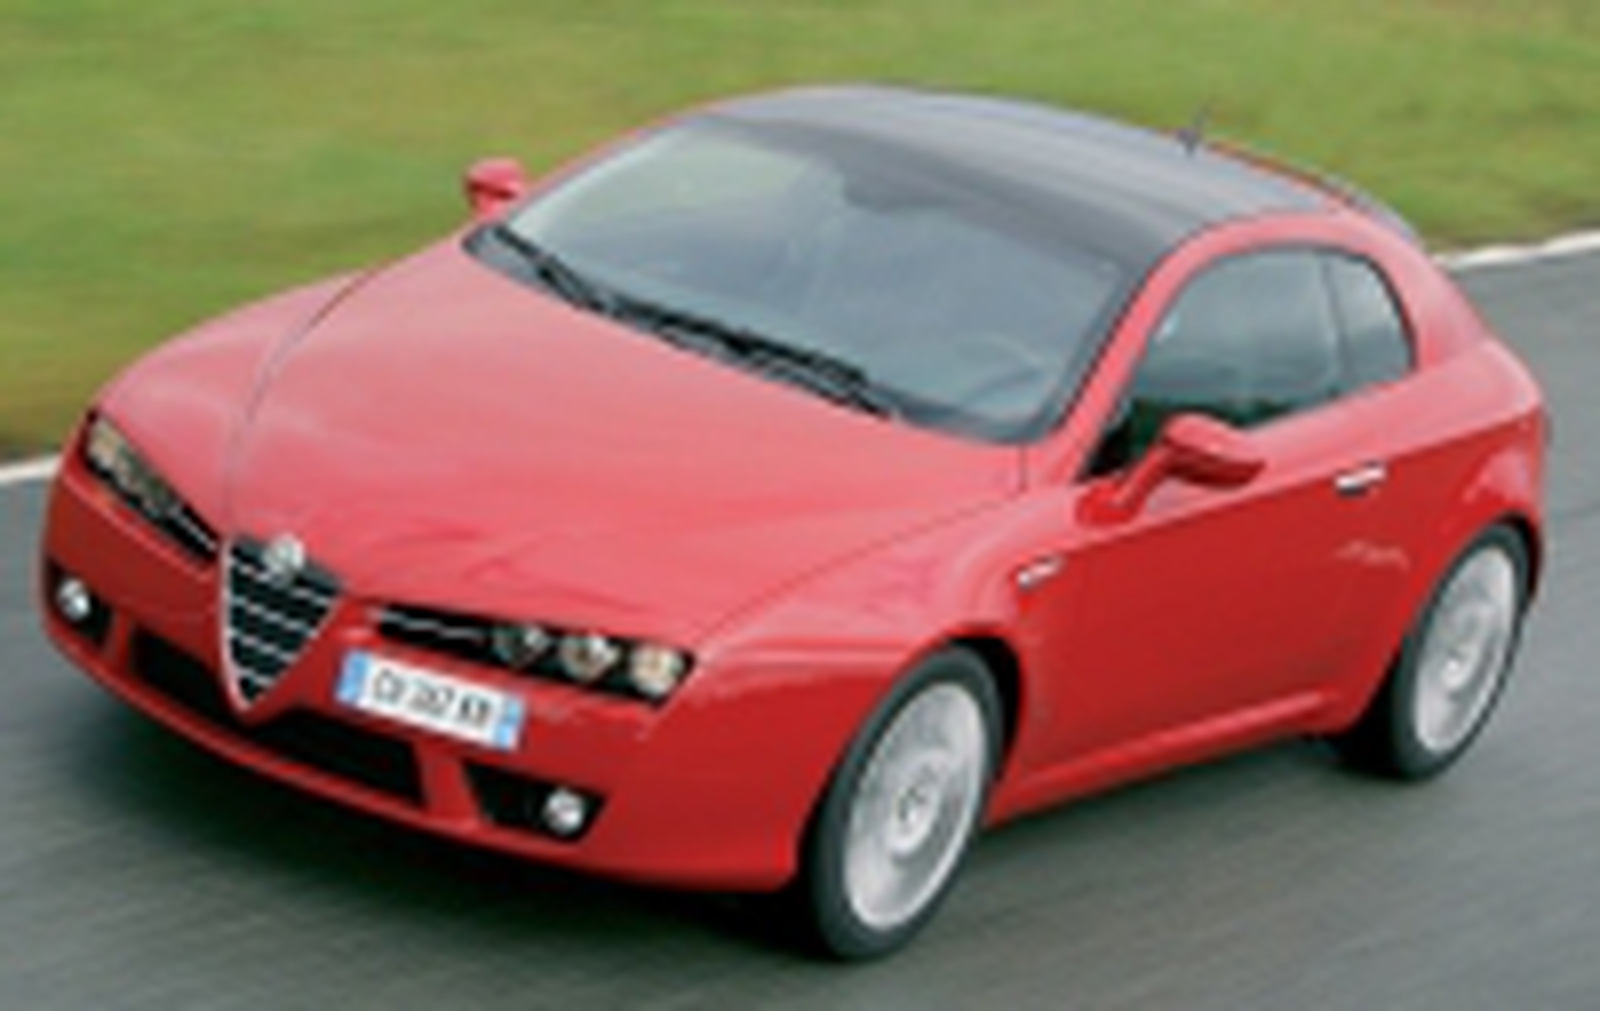 Brera, Made in Italy, Used, Two-way